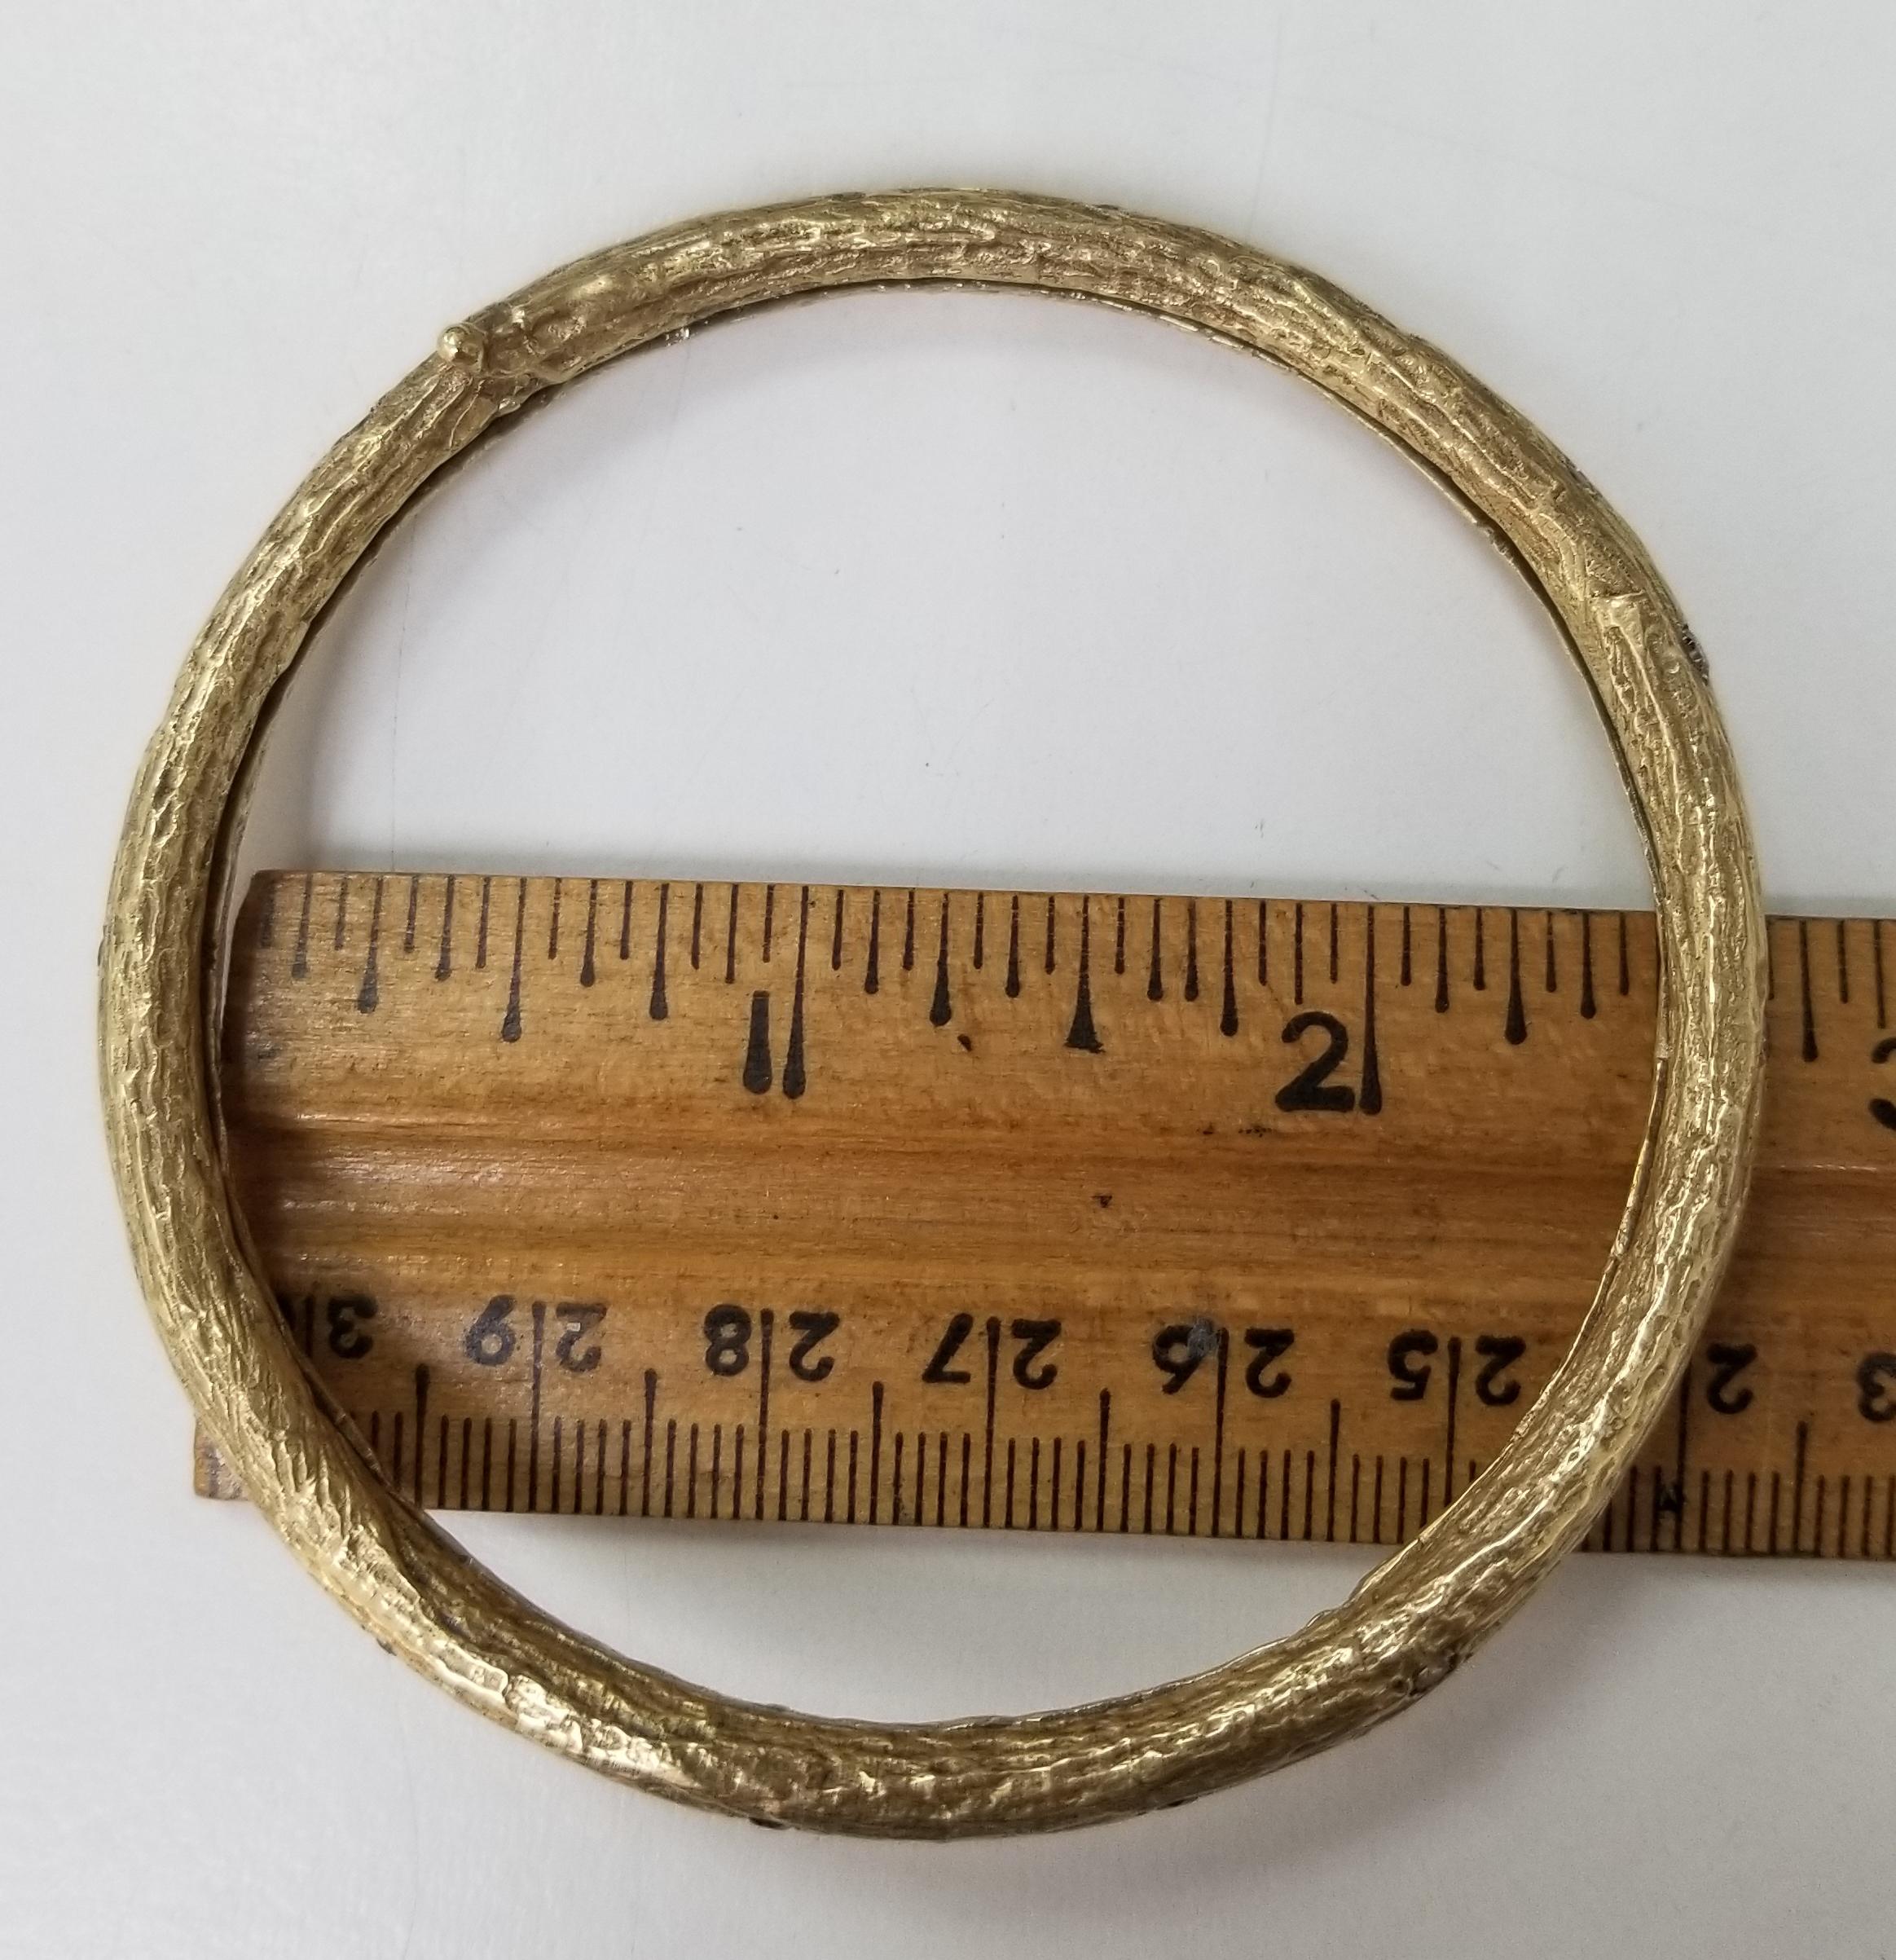 14k yellow gold Gresha signature bark bangle with 31 round natural; white, yellow and brown diamonds weighing 2.50cts.  The bangle is 2 1/2 inches in diameter on the inside, it could be made to fit (price will adjust)
*this design is ours and can be